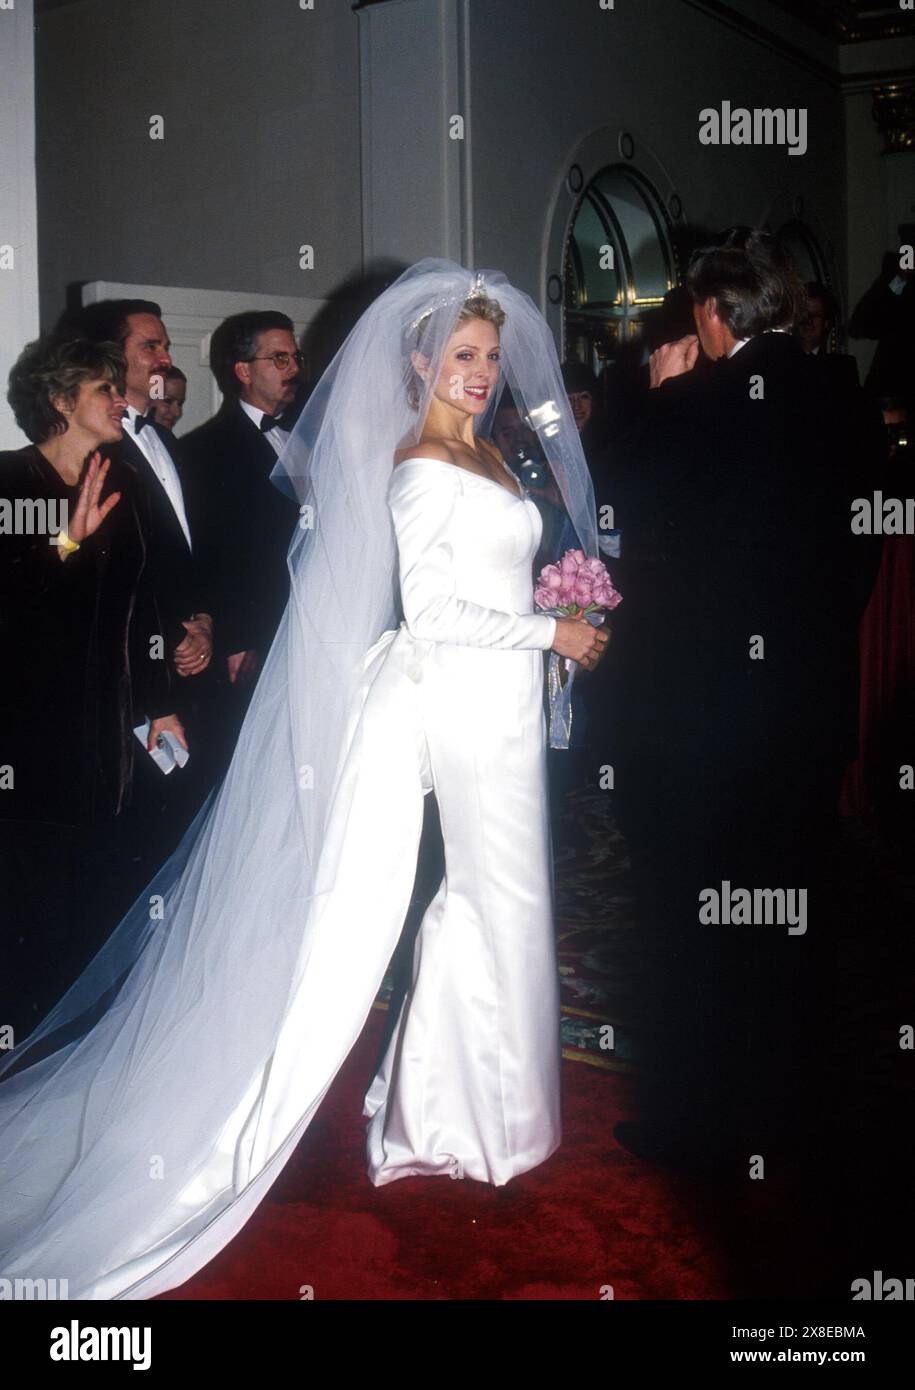 16730 SD12/20/93.WEDDING OF DONALD TRUMP MARLA MAPLES. JUDIE BURSTEIN.(Credit Image: © JUDIE BURSTEIN/ZUMA Wire) EDITORIAL USAGE ONLY! Not for Commercial USAGE! Stock Photo